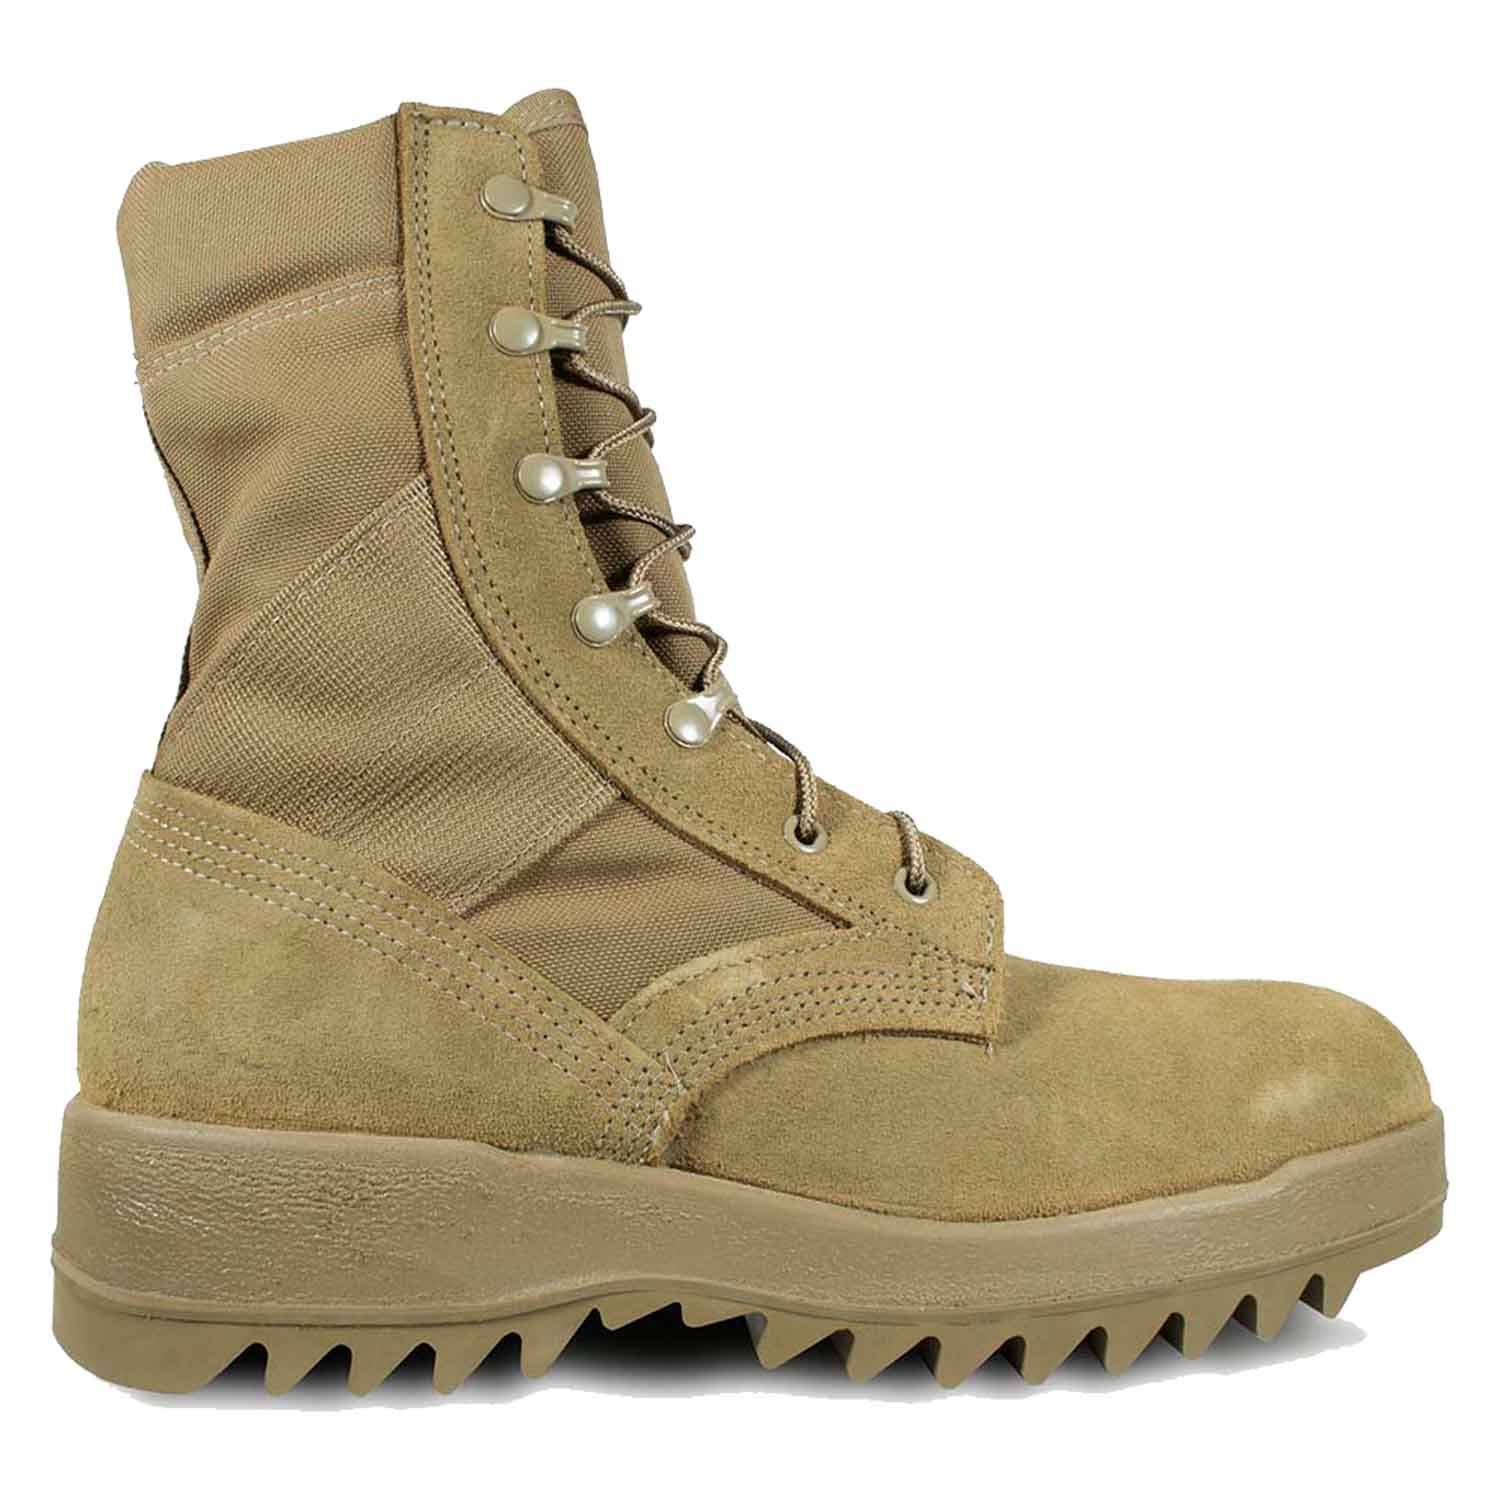 McRae Hot Weather Ripple Sole Combat Boots